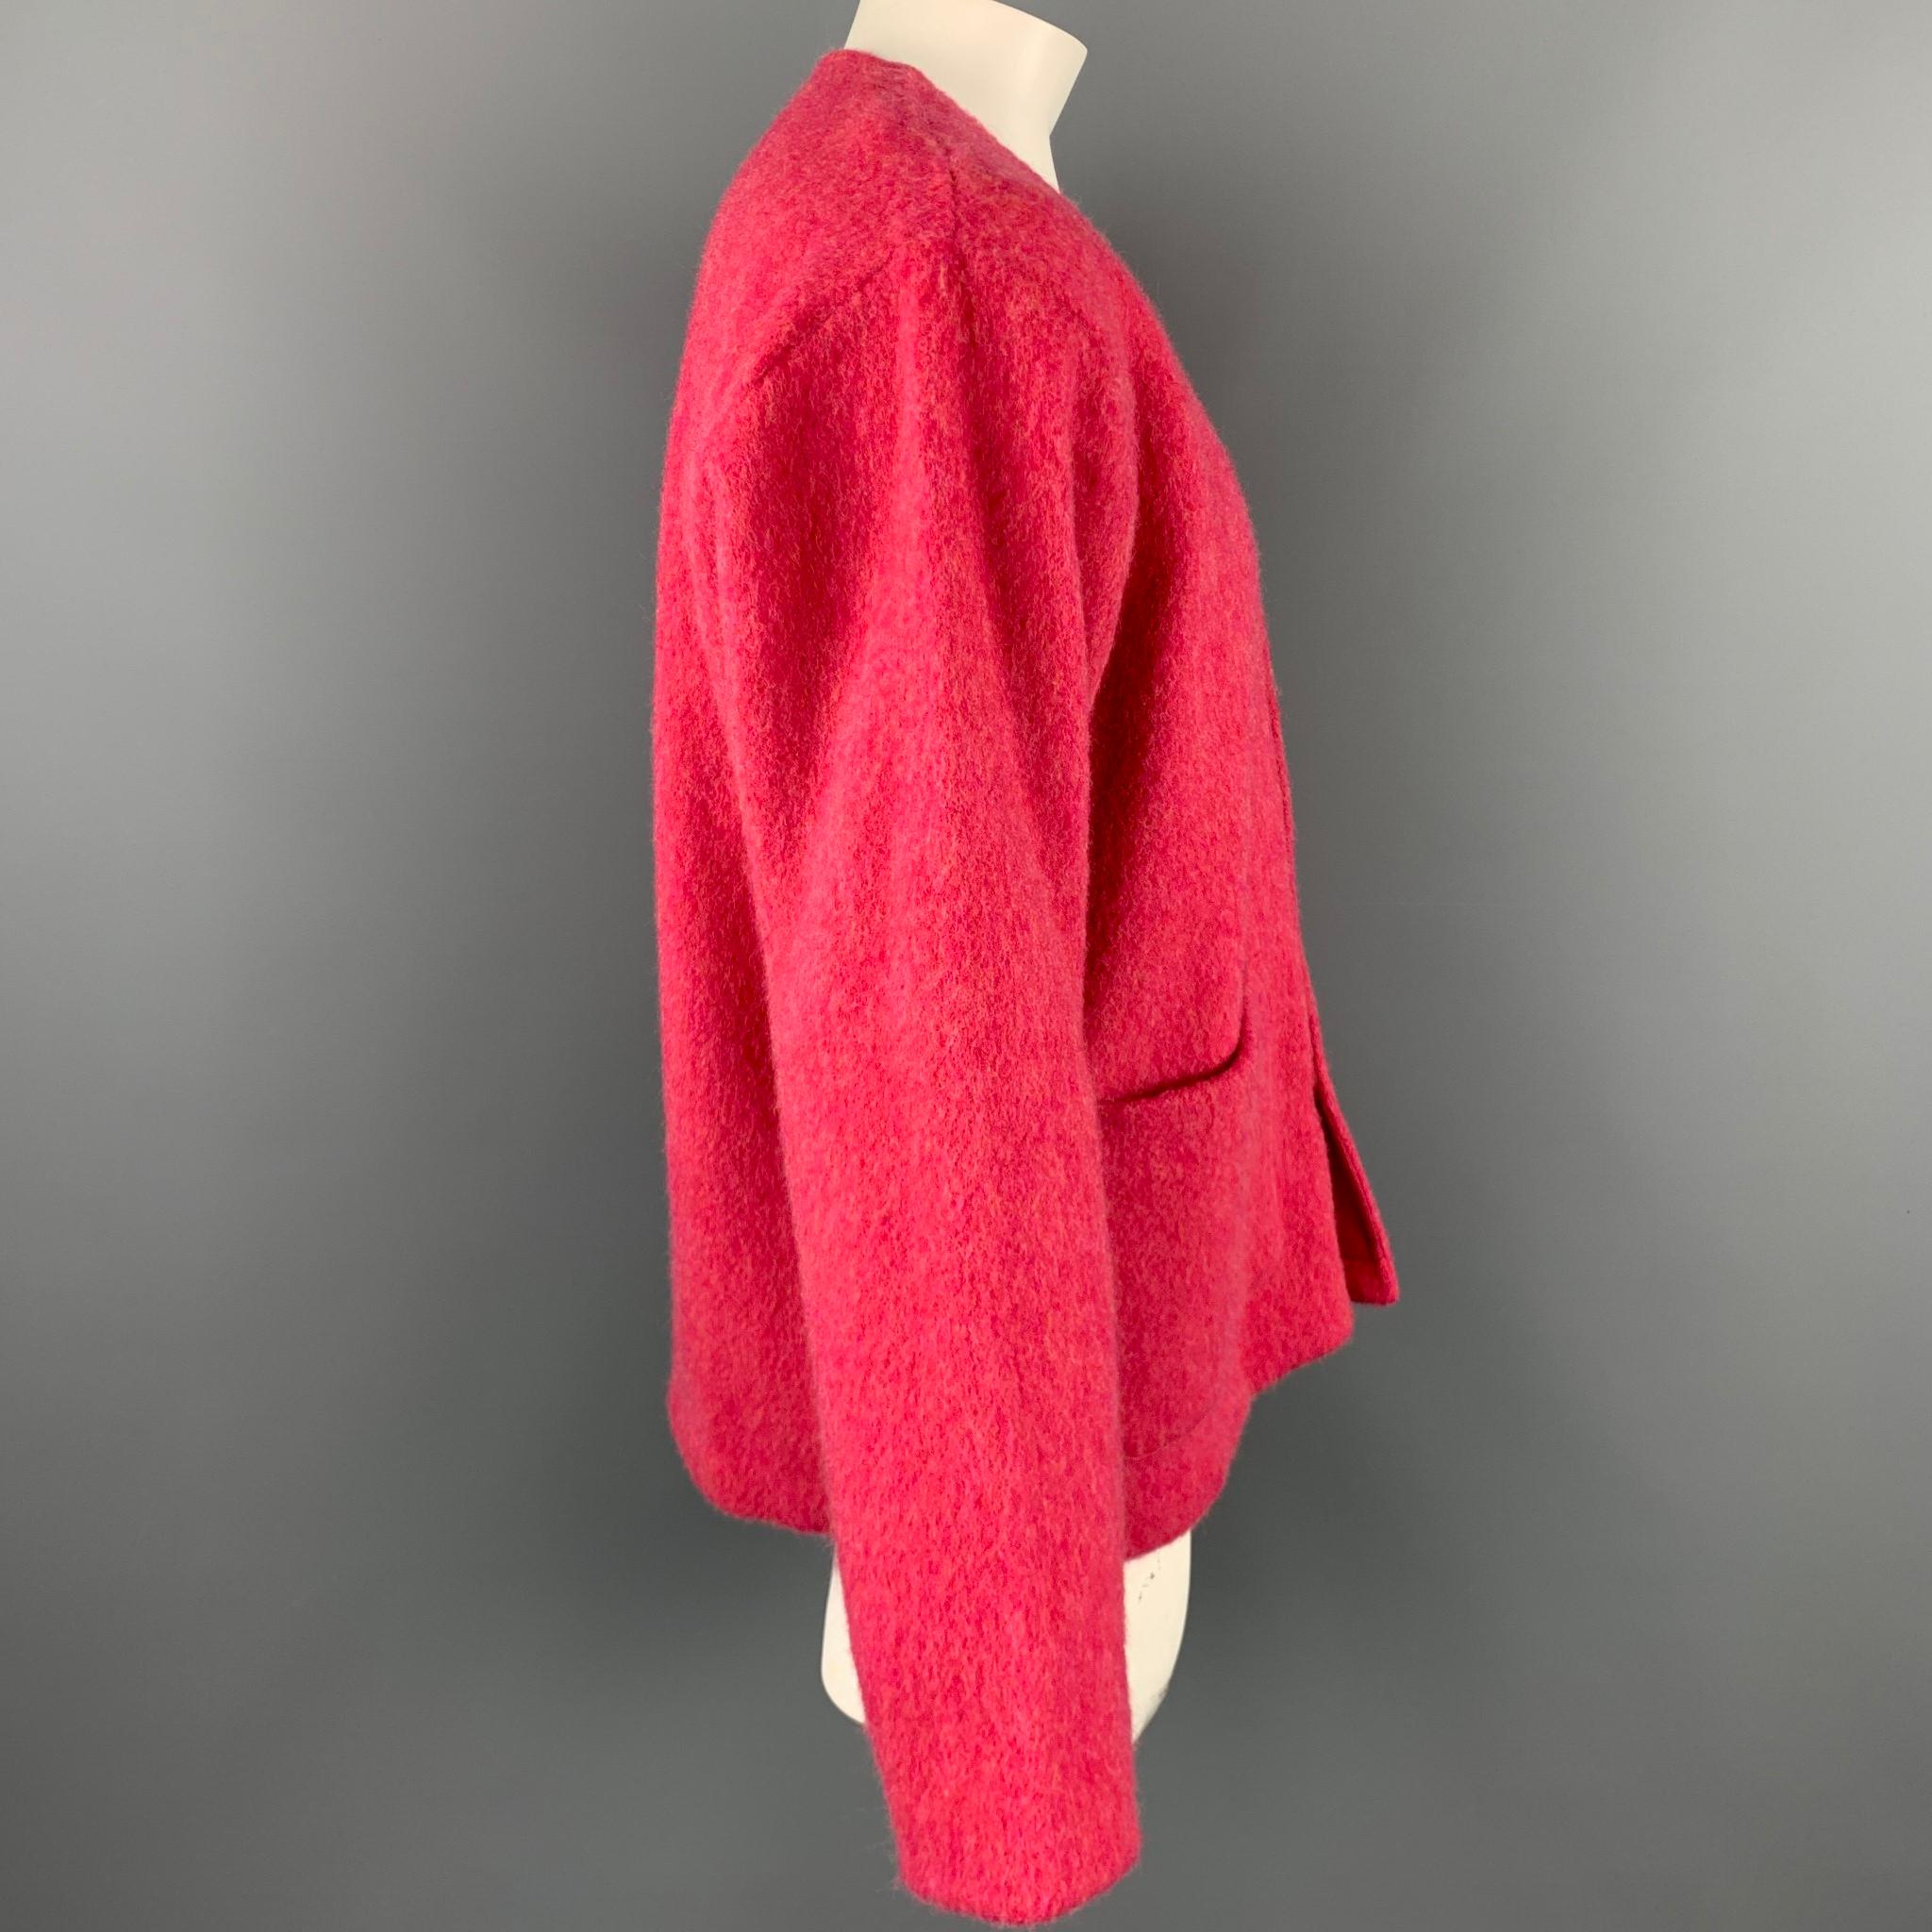 OUR LEGACY cardigan comes in a pink virgin wool featuring a v-neck, patch pockets, and a buttoned closure. ade in Portugal.

Excellent Pre-Owned Condition.
Marked: 50

Measurements:

Shoulder: 20 in. 
Chest: 48 in. 
Sleeve: 26 in. 
Length: 28.5 in.